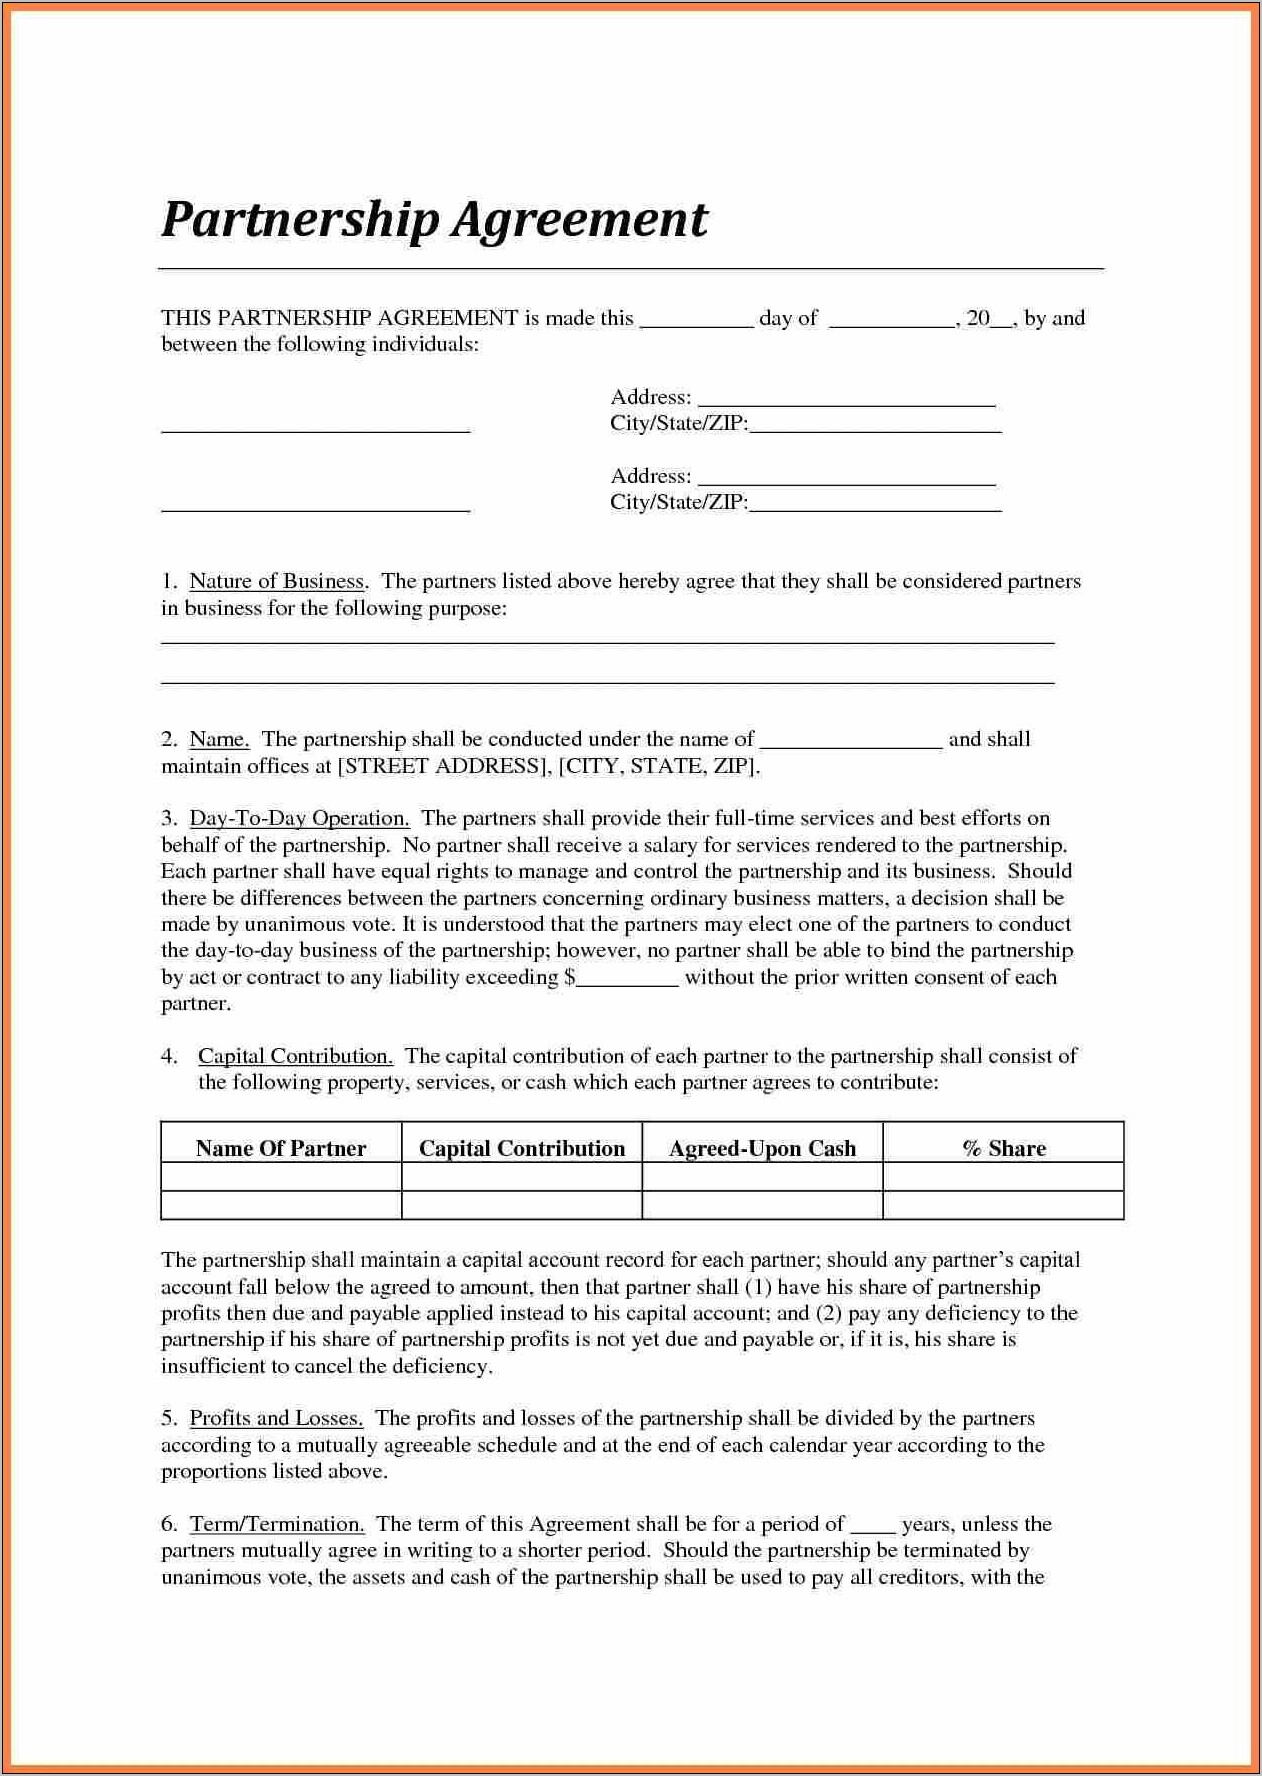 Business Buyout Agreement Template